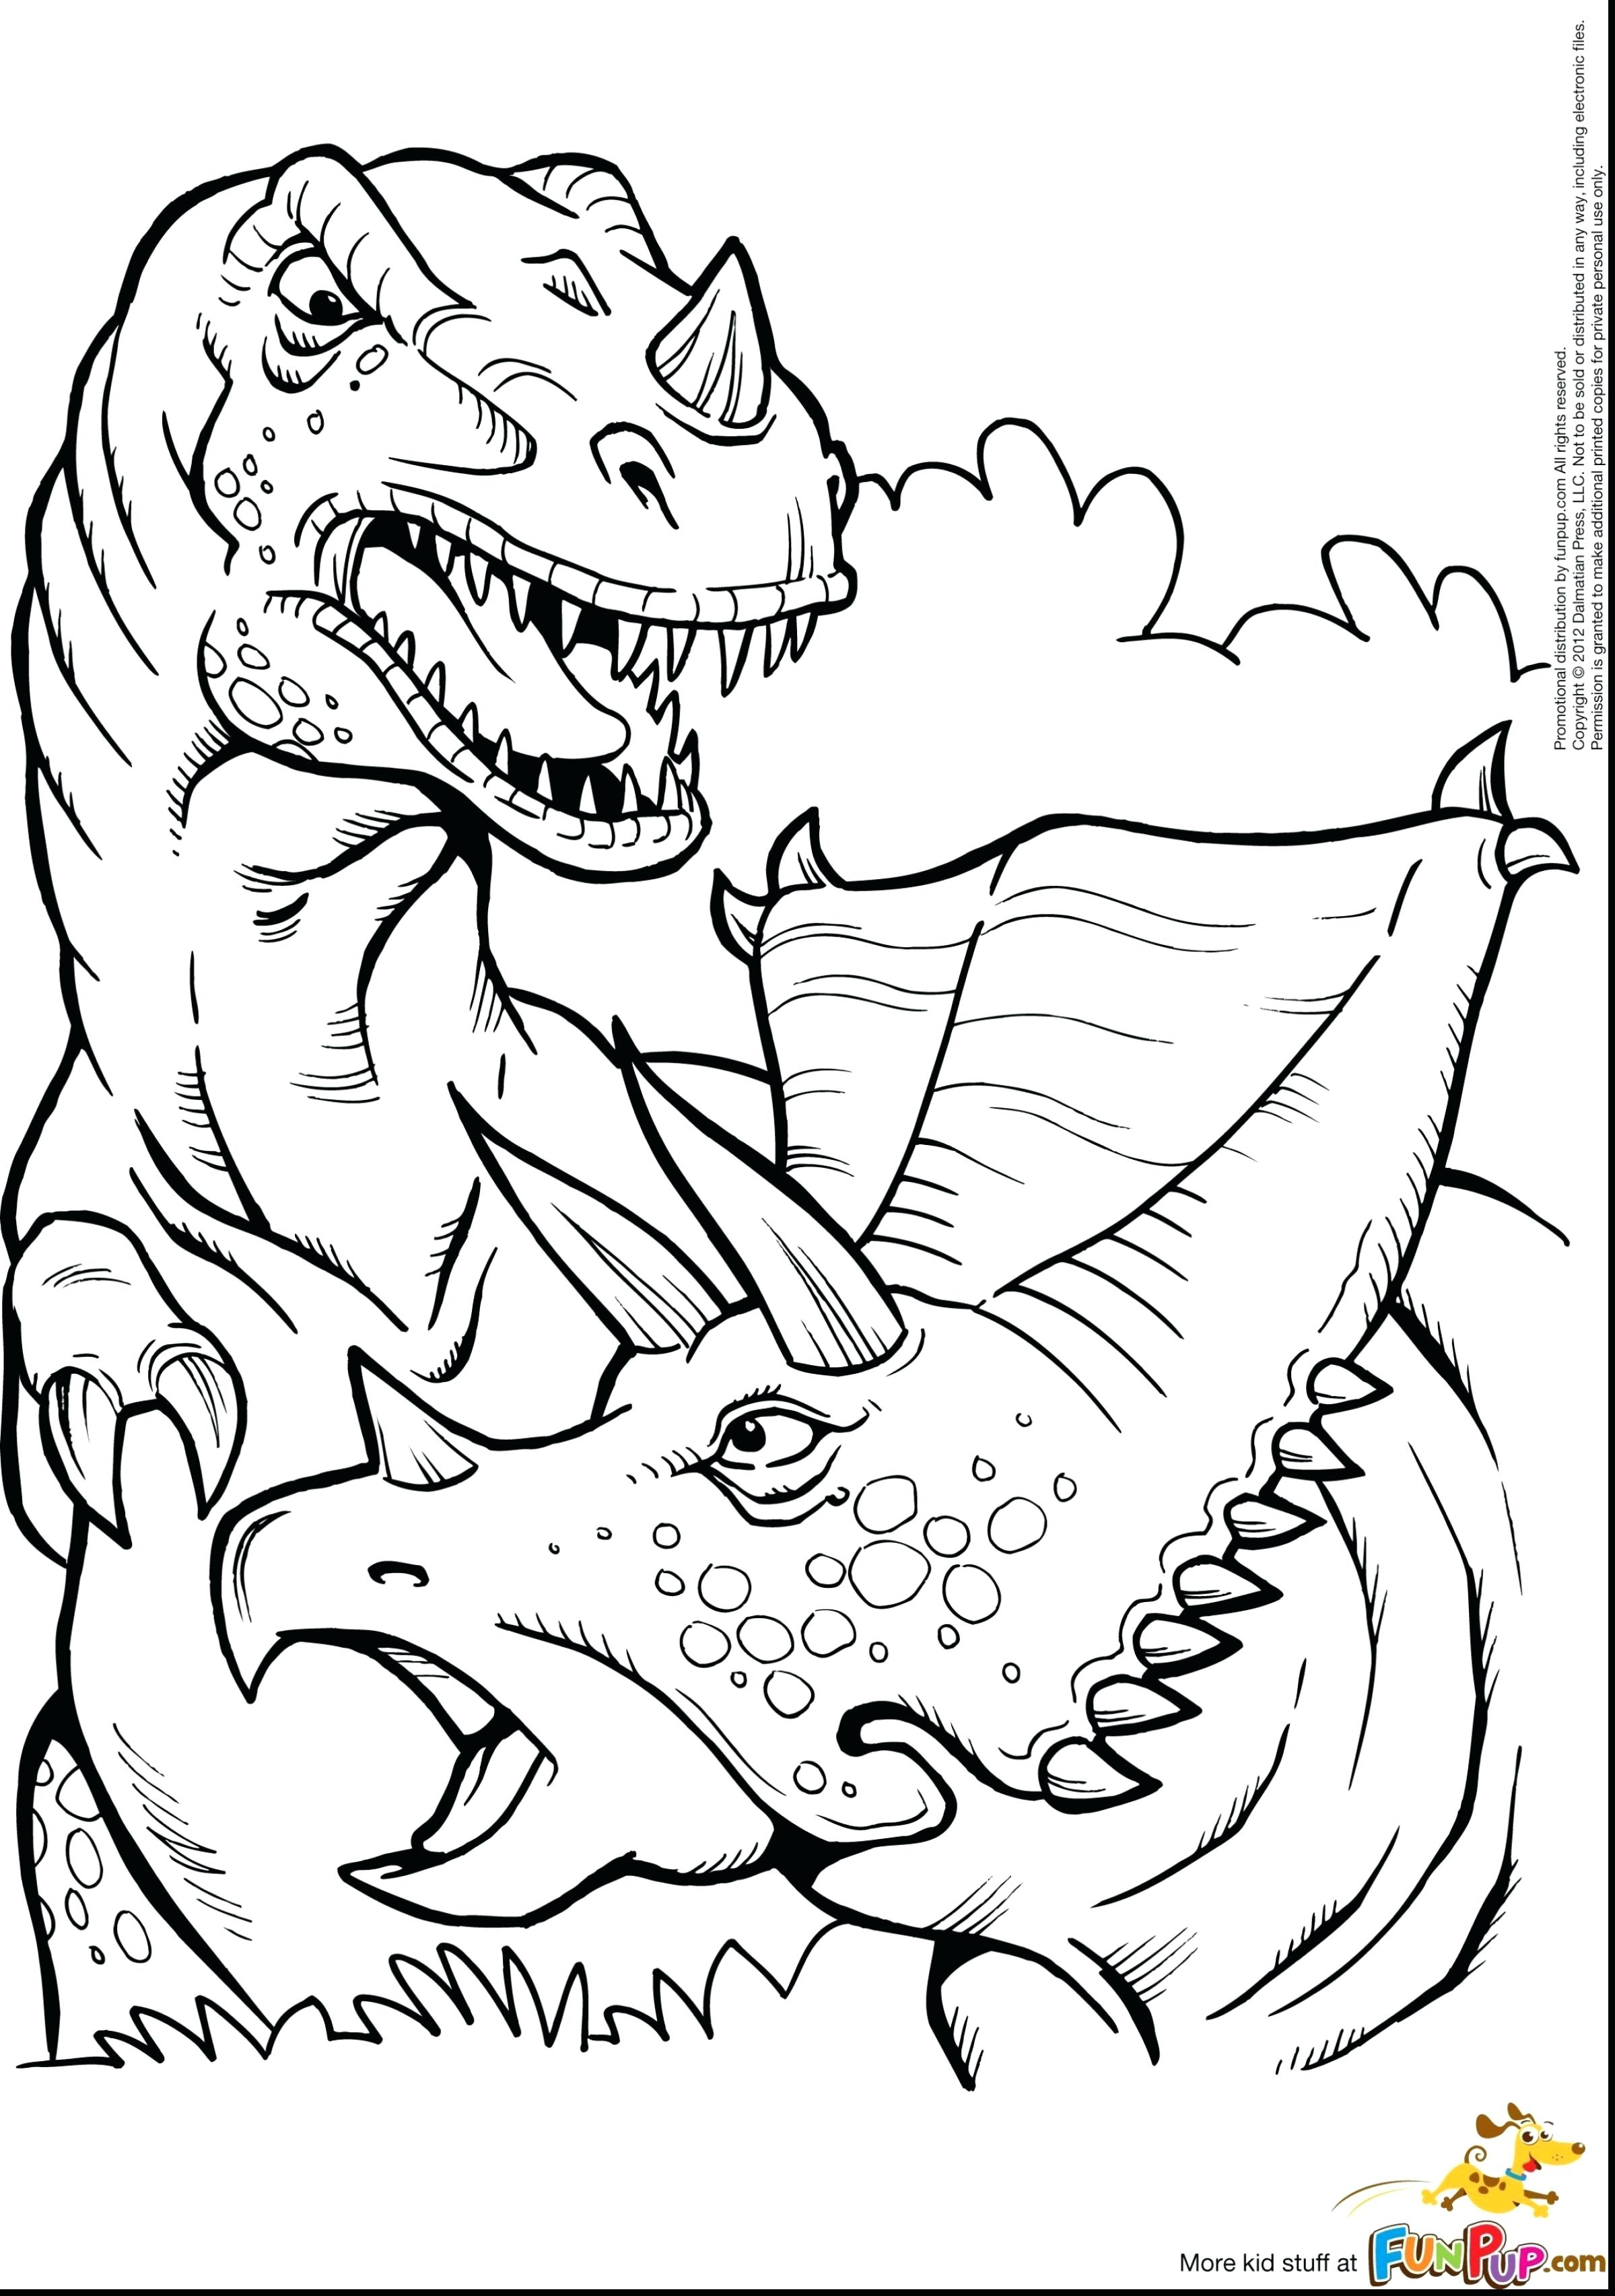 The Little Red Hen Coloring Pages Rar Descargar Little Red Hen Coloring Sheets Dracosheetco